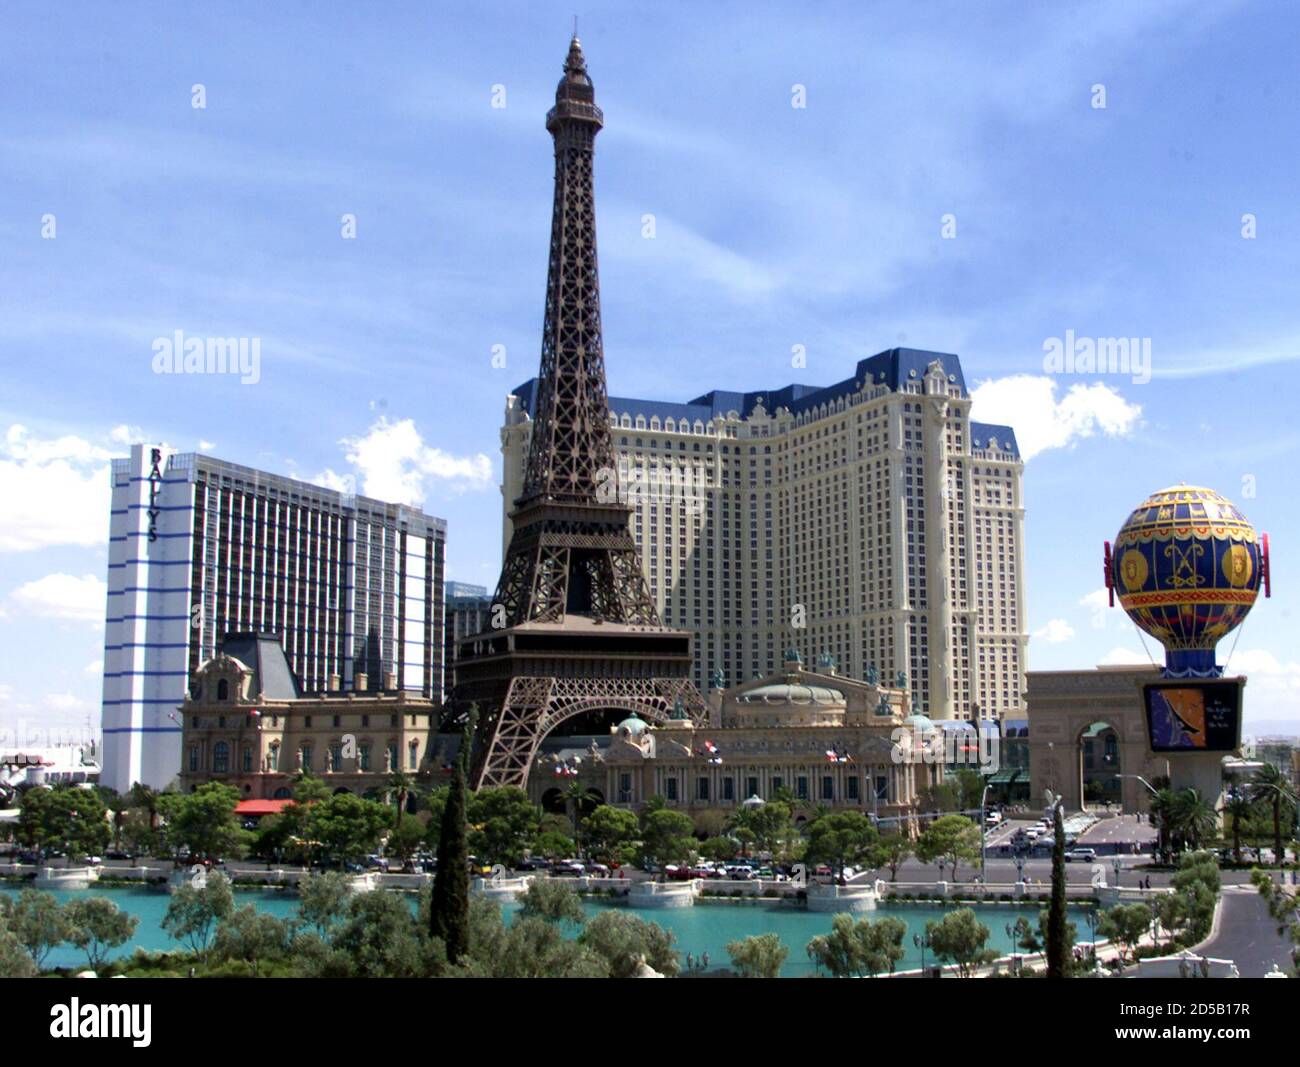 Paris Las Vegas, the fourth new mega-resort to open in Las Vegas in the past 11 months, is ready for its grand opening September 1, 1999 in Las Vegas. The $800 million French-theme resort is a project of Park Place Entertainment Corp. and includes an 85,000 sq. ft. casino, 130,000 sq. ft. of convention and meeting space, a European health spa and 31,500 sq. ft. of retail space.  Towering over the Casino is a 50 story replica of the Eiffel Tower.  Park Place Entertainment also owns Bally's (L) and the Flamingo Hilton and the Las Vegas Hilton.   ??» Stock Photo